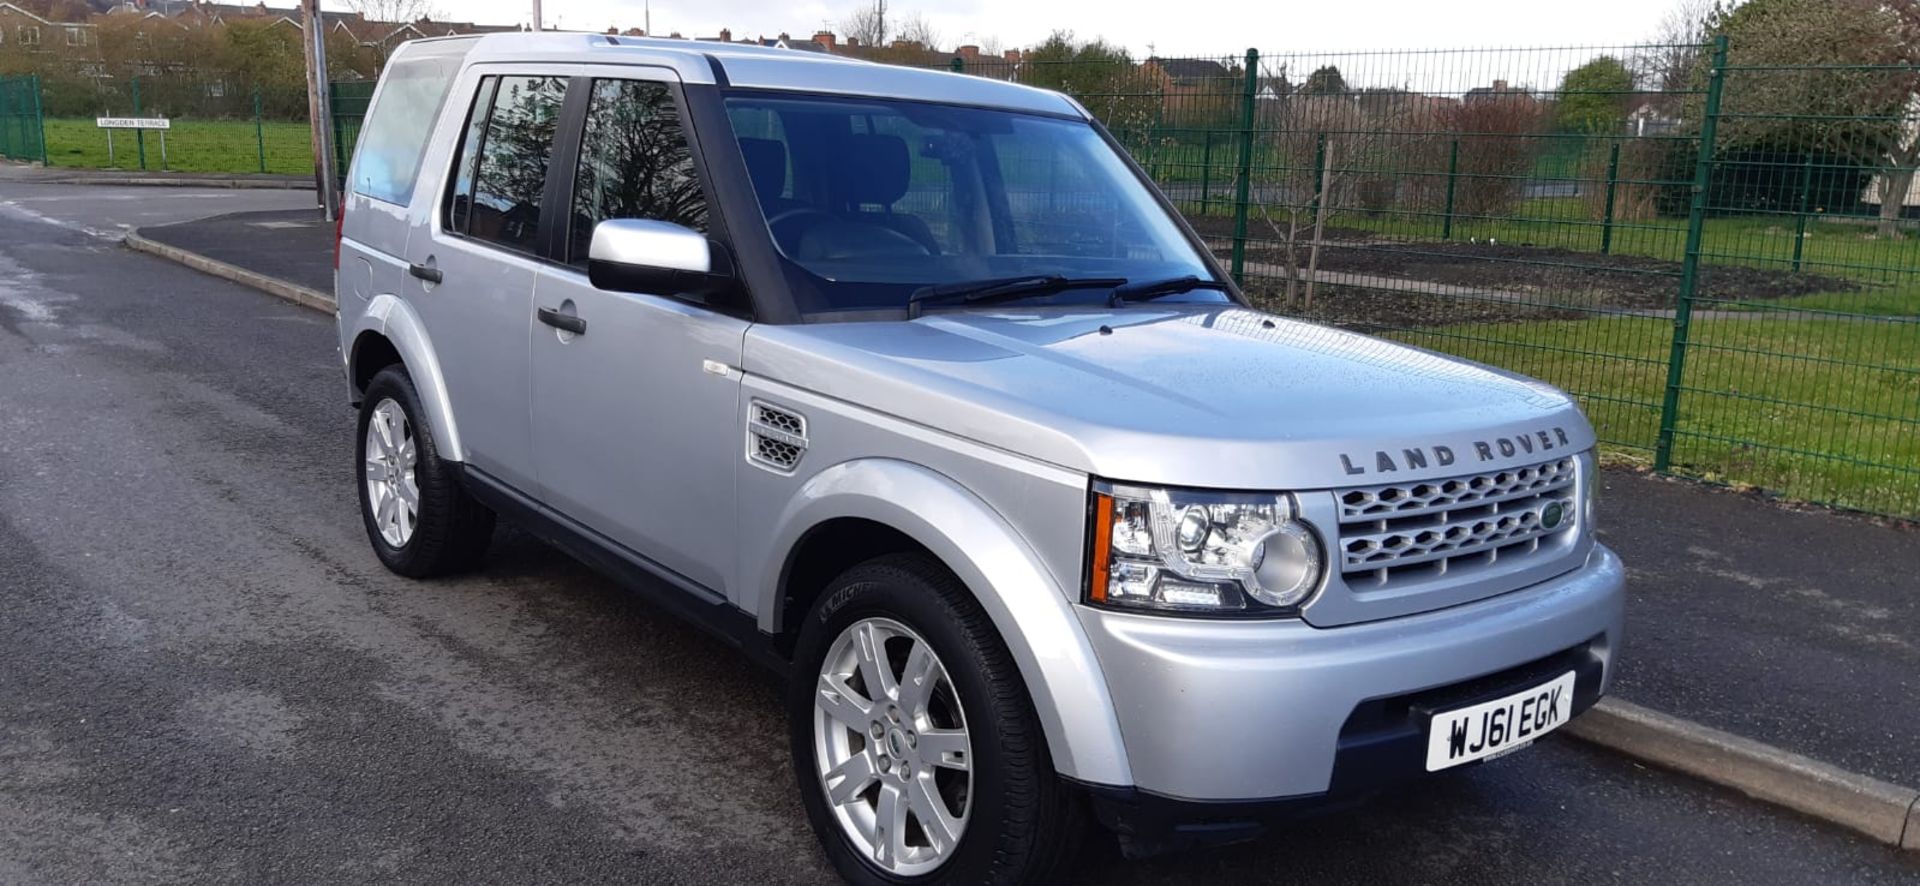 LAND ROVER DISCOVERY GS SDV6 AUTO 7 SEATER SILVER ESTATE, 127K MILES *NO VAT* - Image 2 of 16